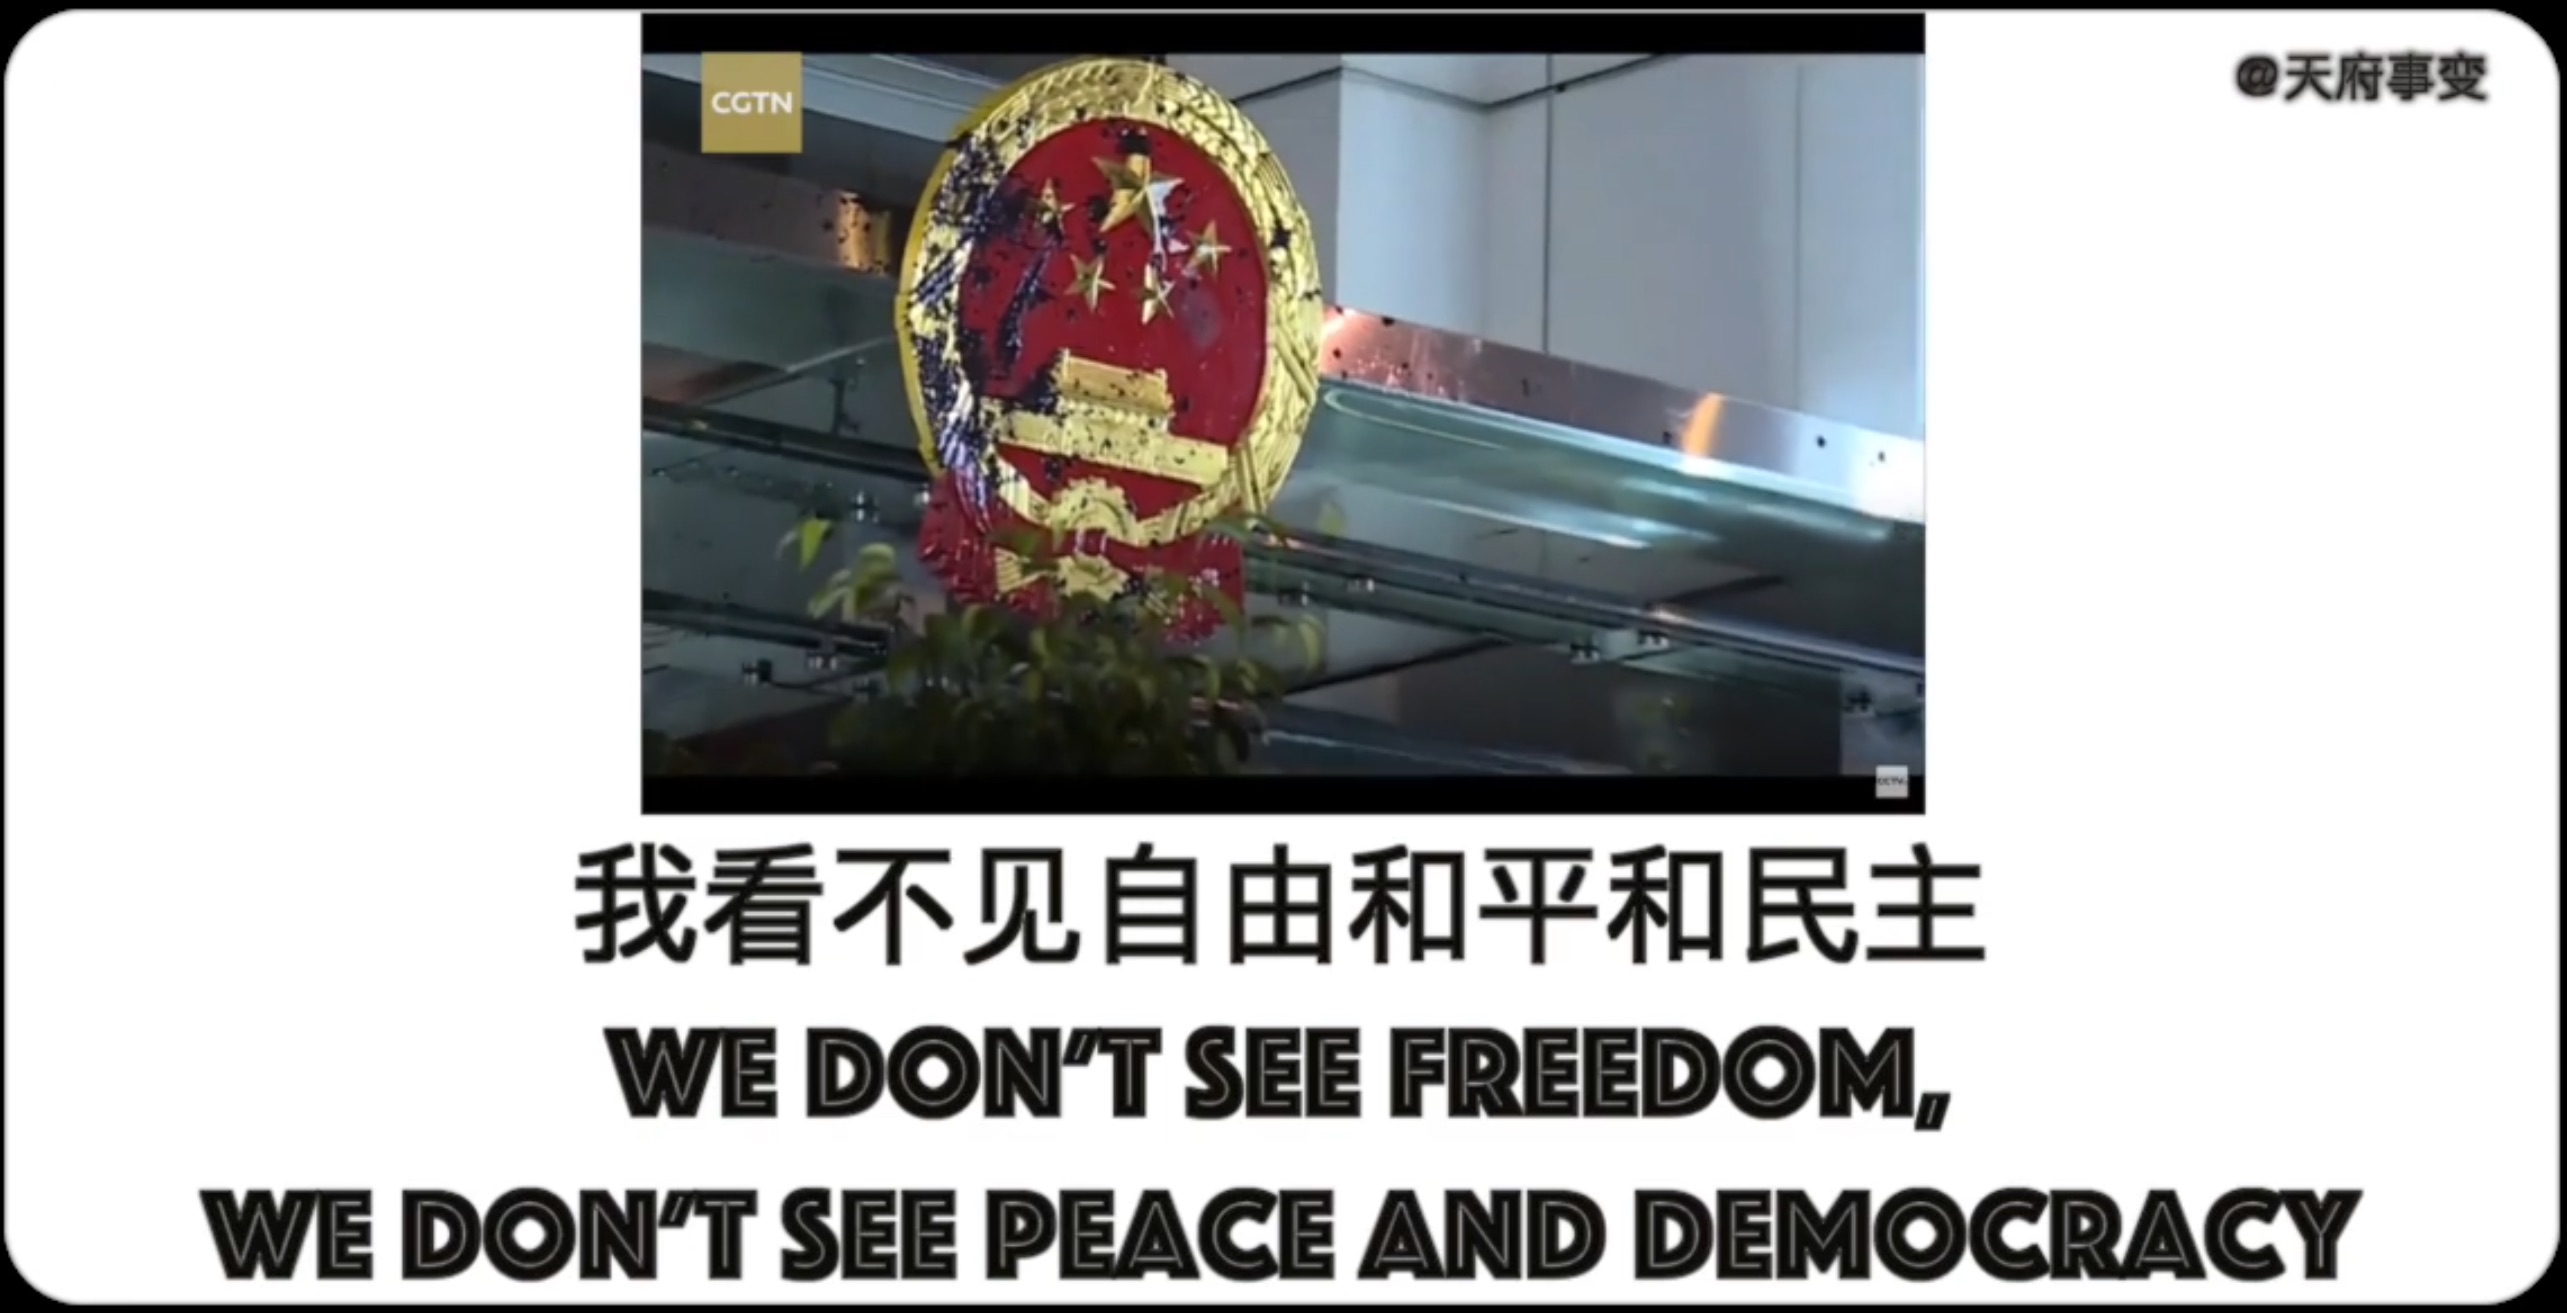 A still from a new music video by Beijing-approved rap group CD Rev, who are seriously beefing with Hong Kong’s protesters. Screengrab via YouTube.